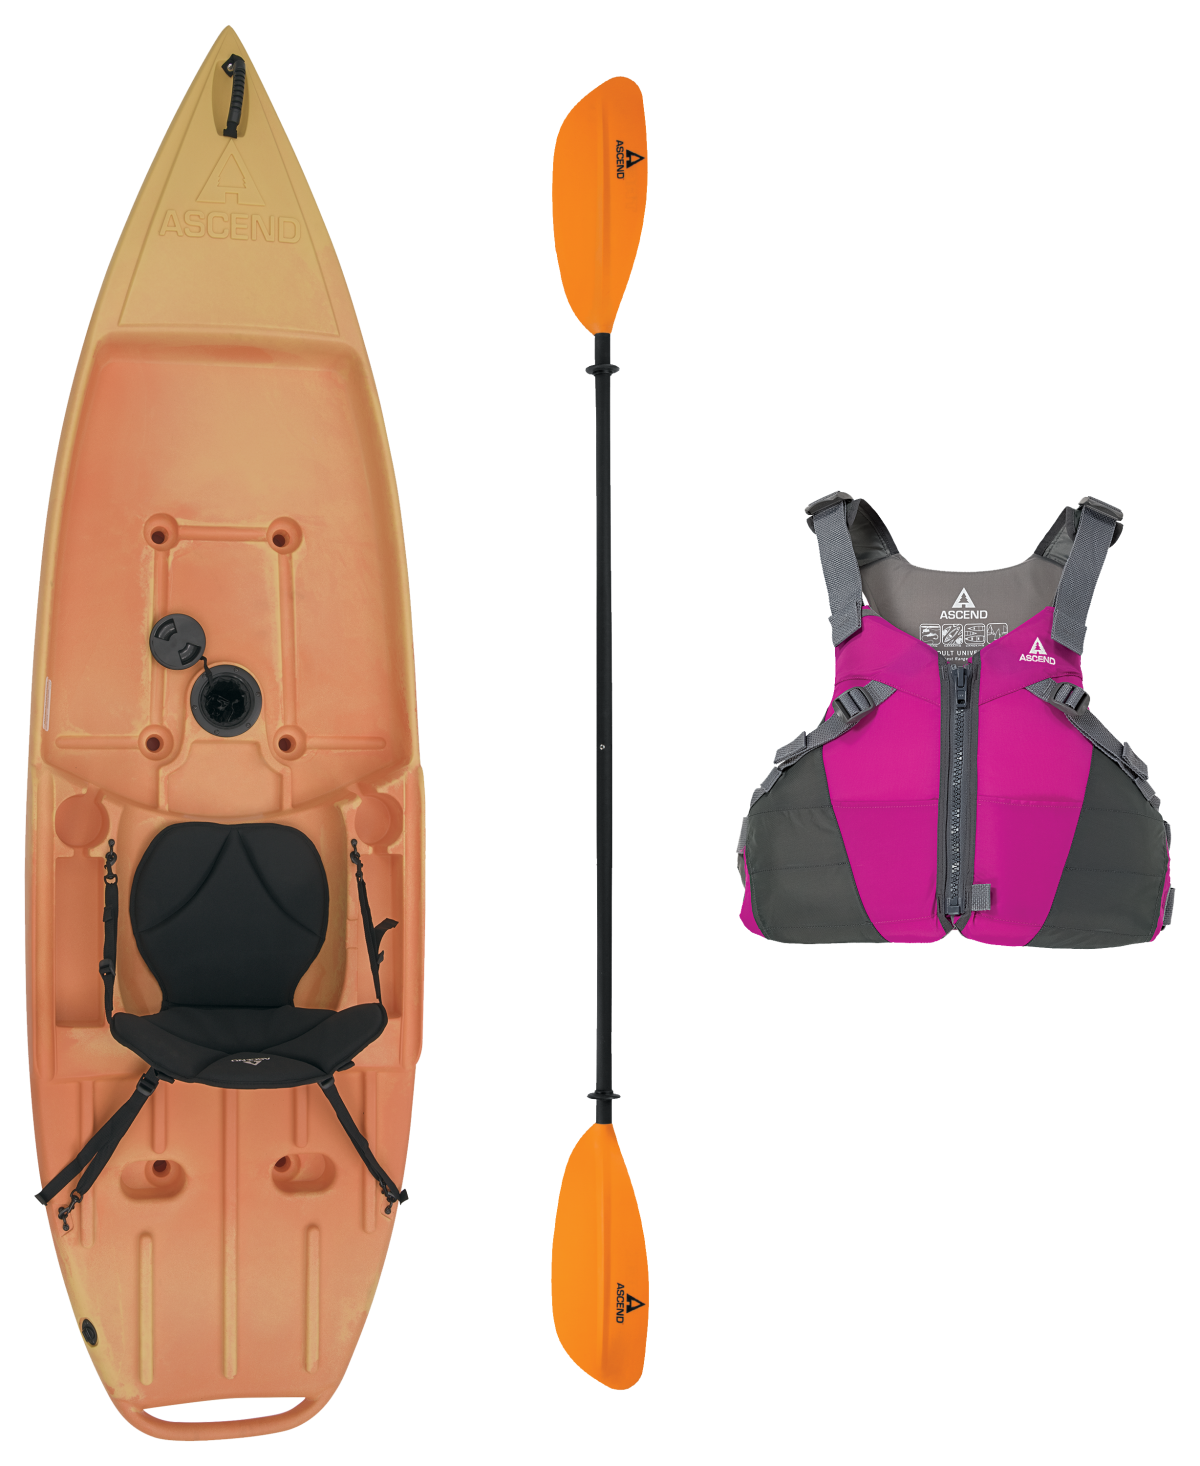 Ascend 9R Sport Yellow/Orange Sit-On-Top Kayak, Paddle, and Life Jacket Combo